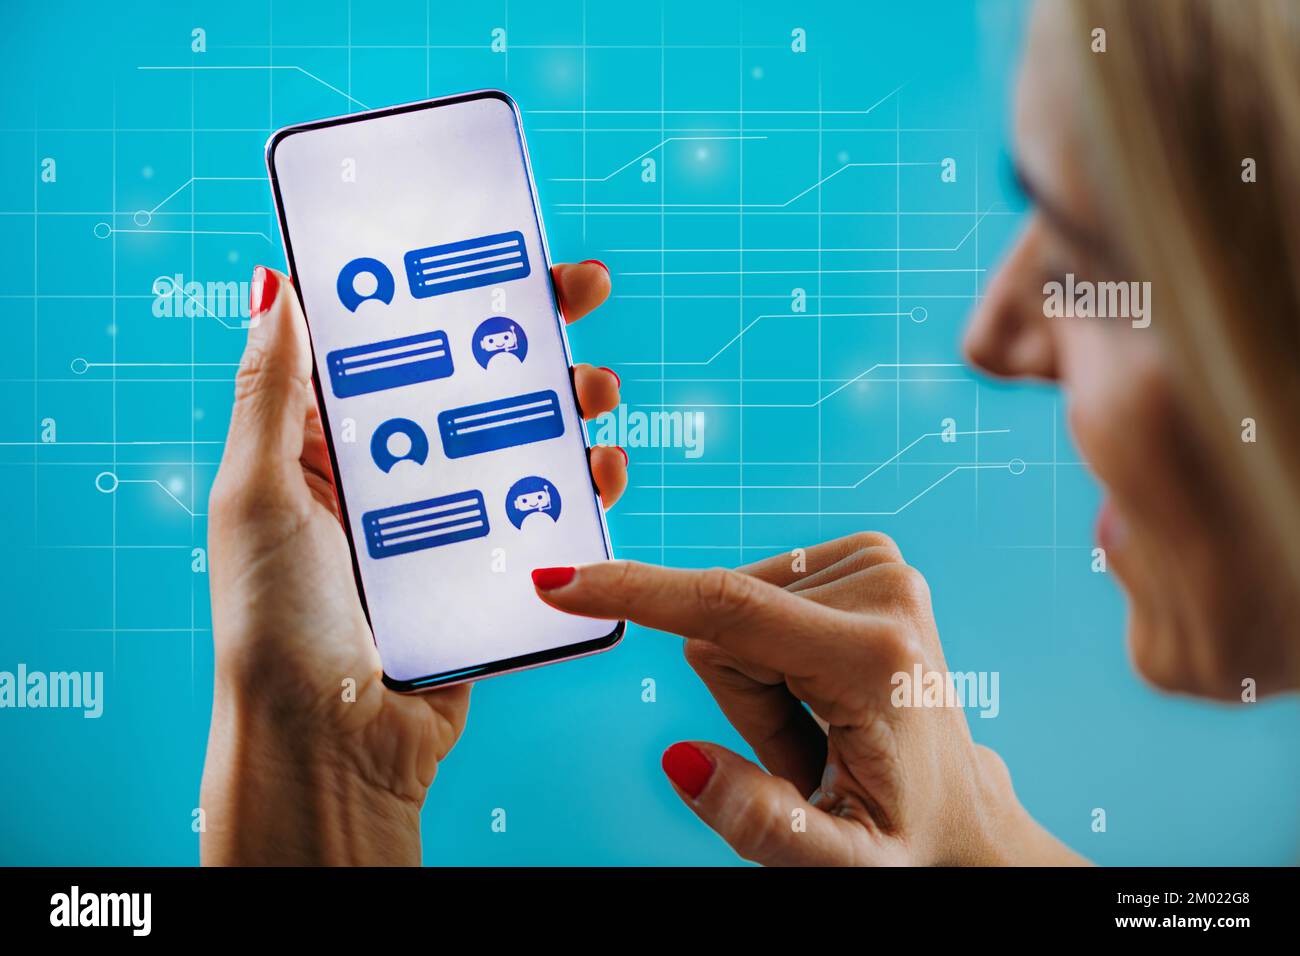 Customer using a chatbot on a smartphone. Stock Photo